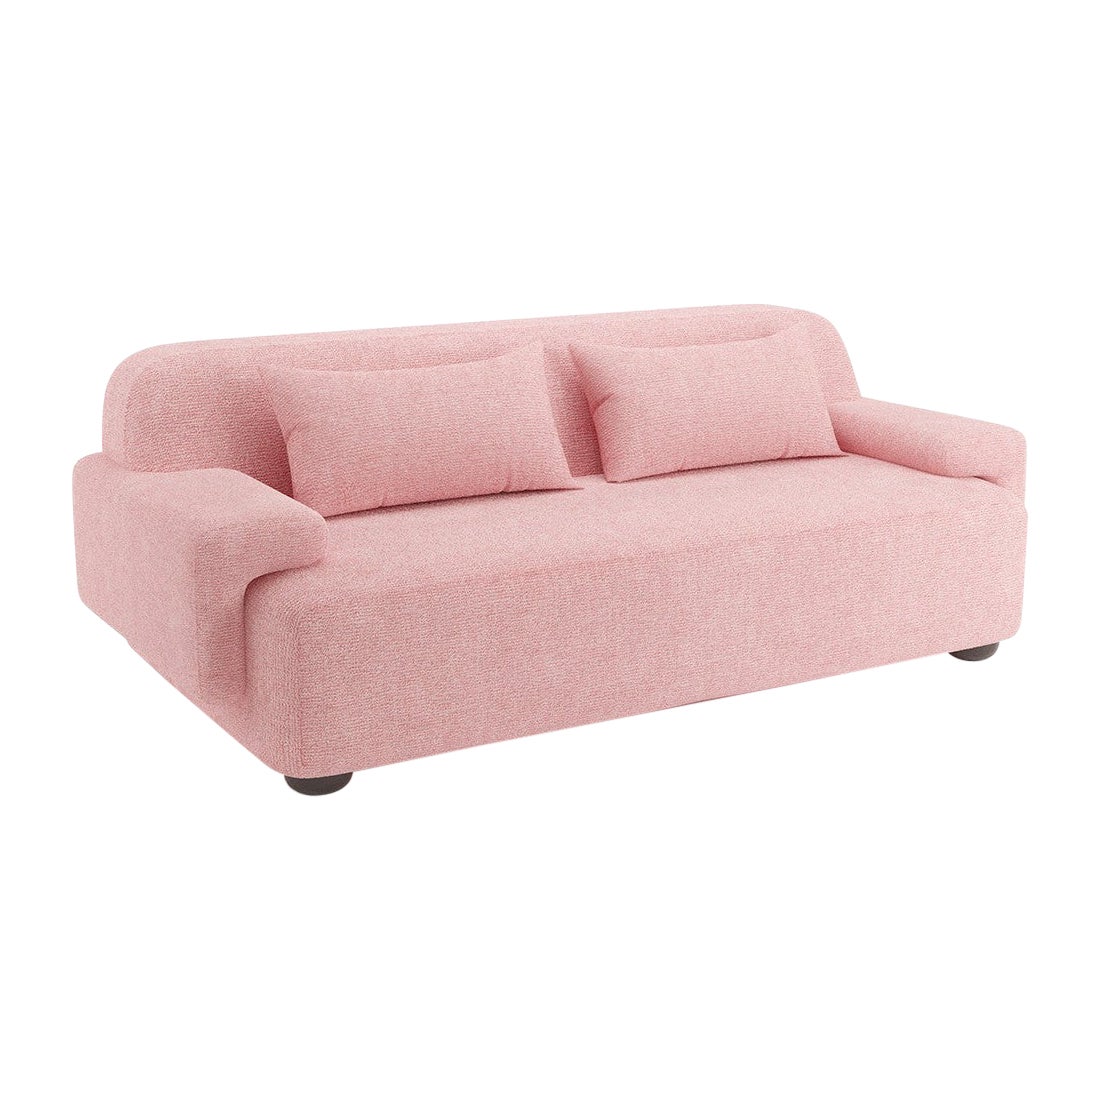 Popus Editions Lena 3 Seater Sofa in Pink Megeve Fabric with Knit Effect